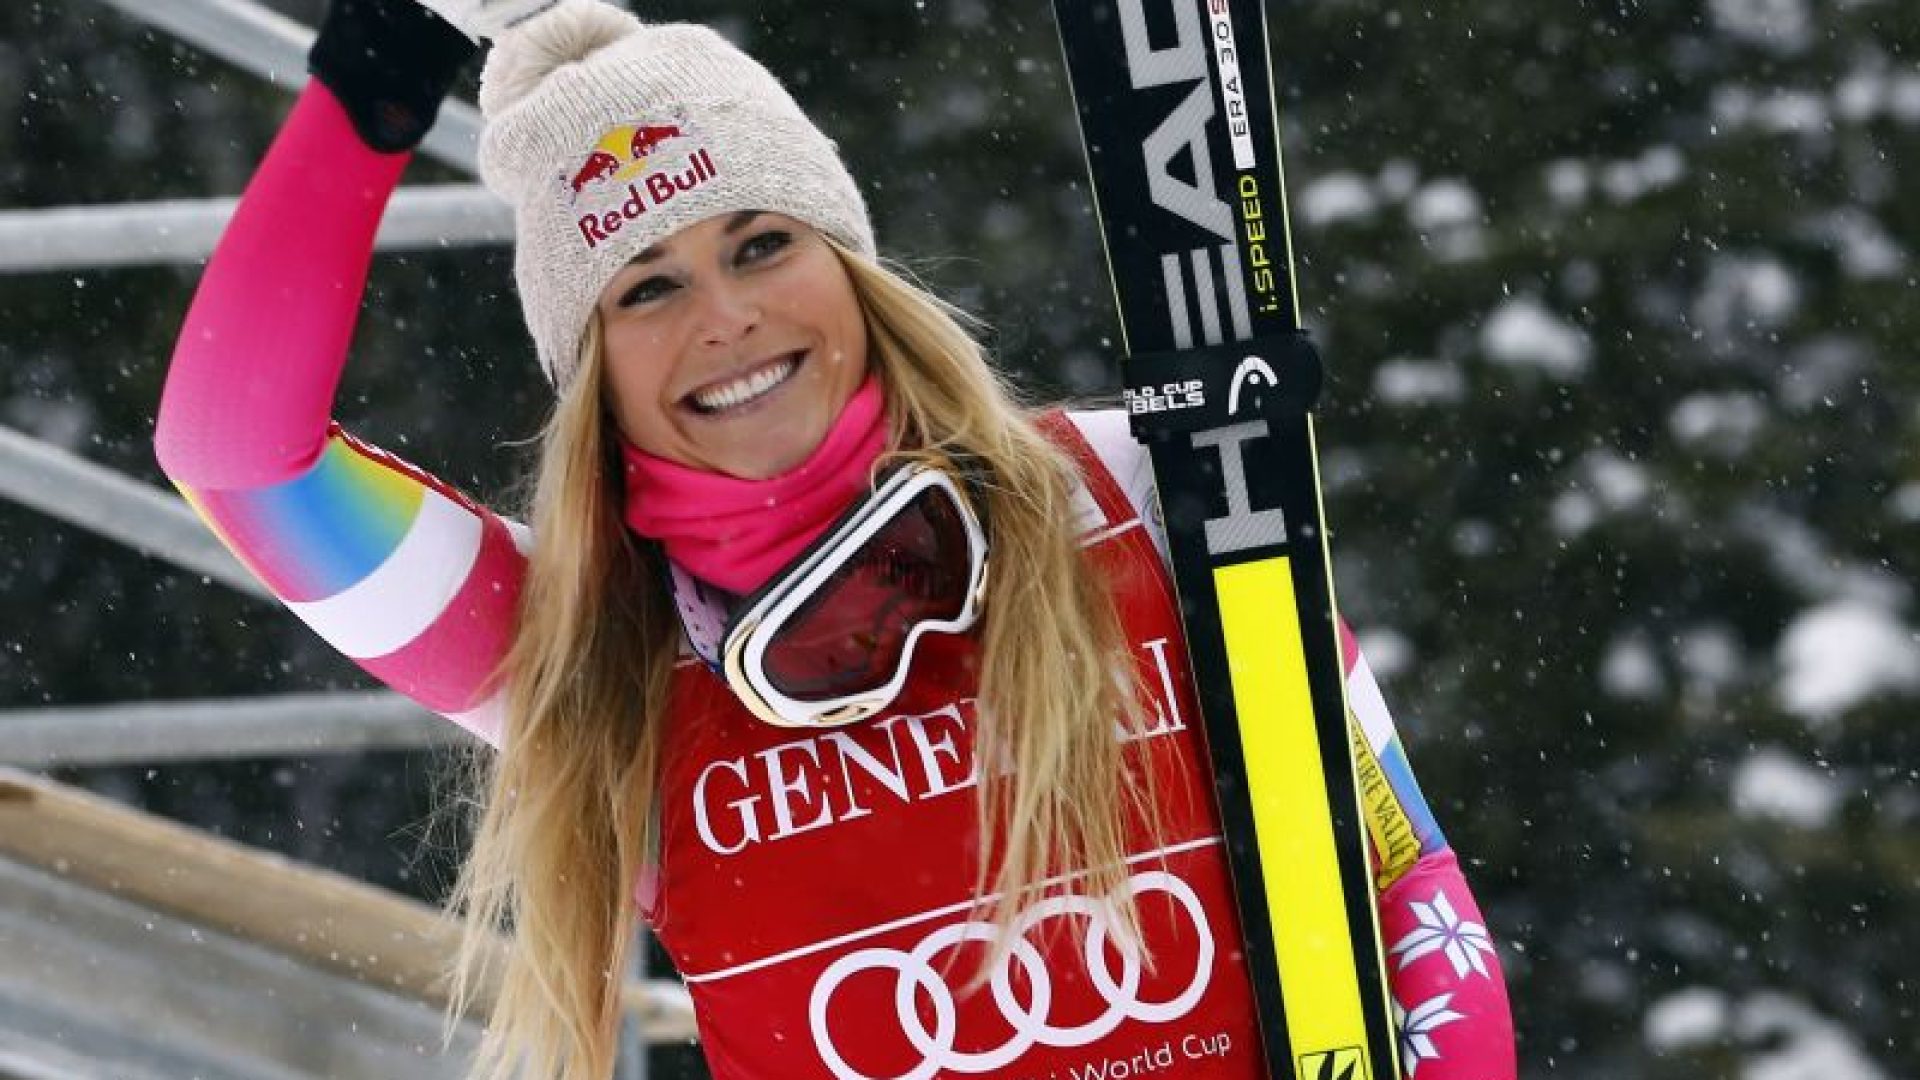 lindsey-wins-dh-in-lake-louise-5